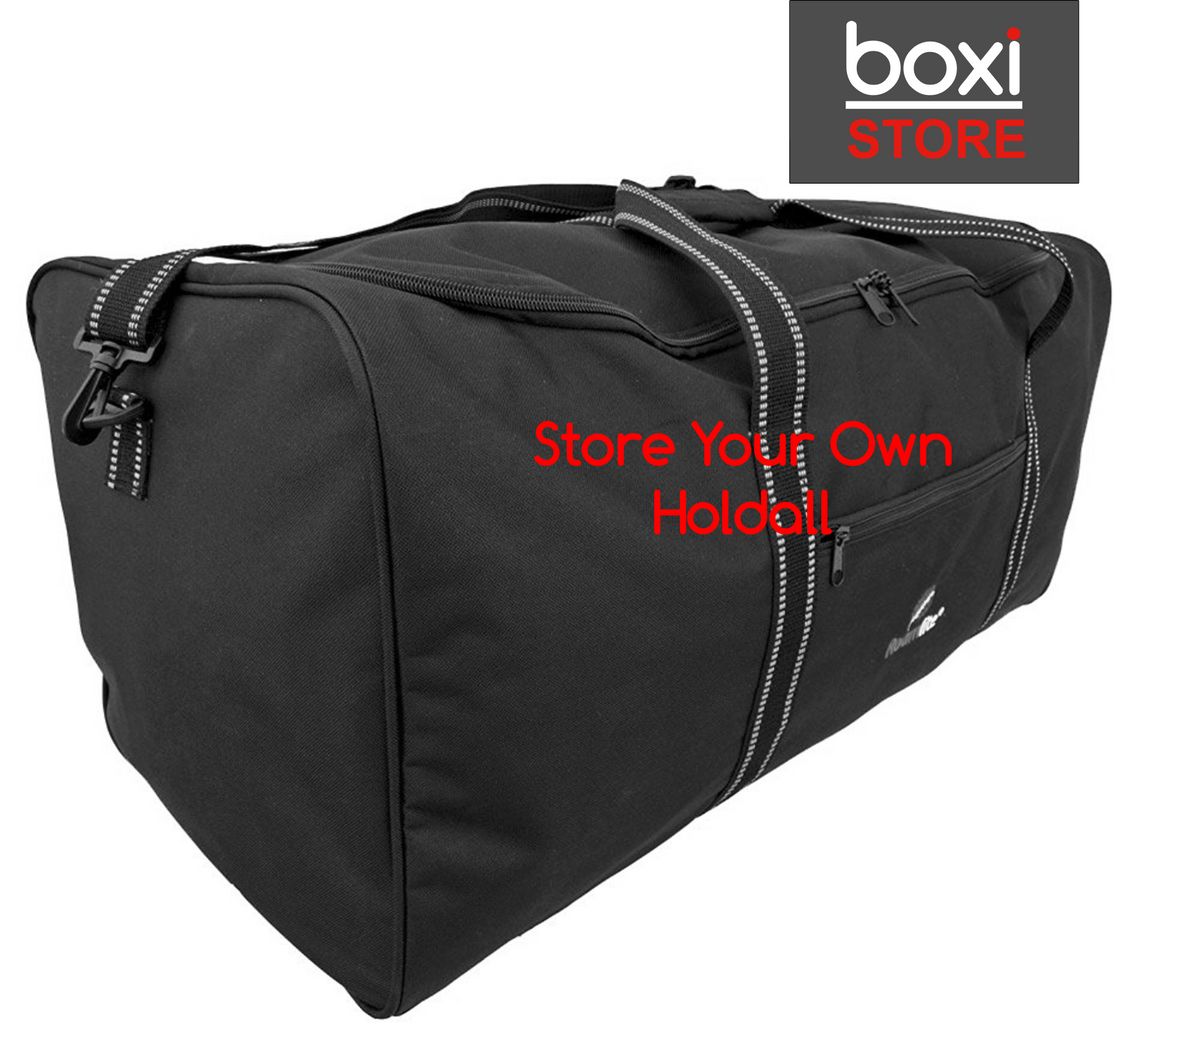 BoxiStore Store Your Own Holdall